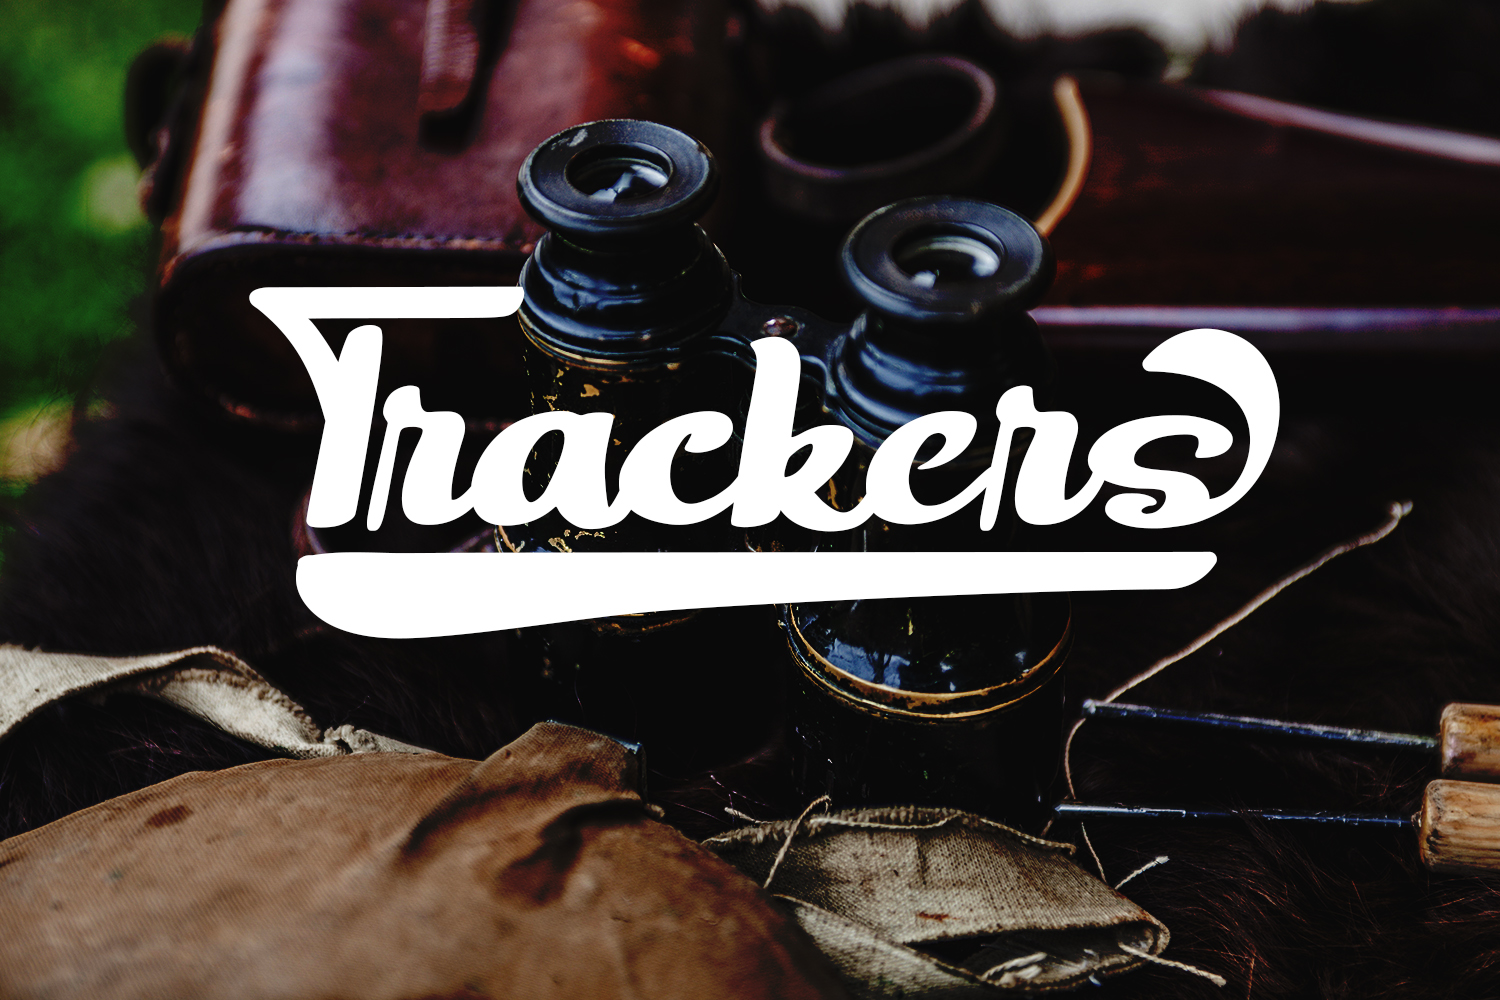 Trackers Free Font